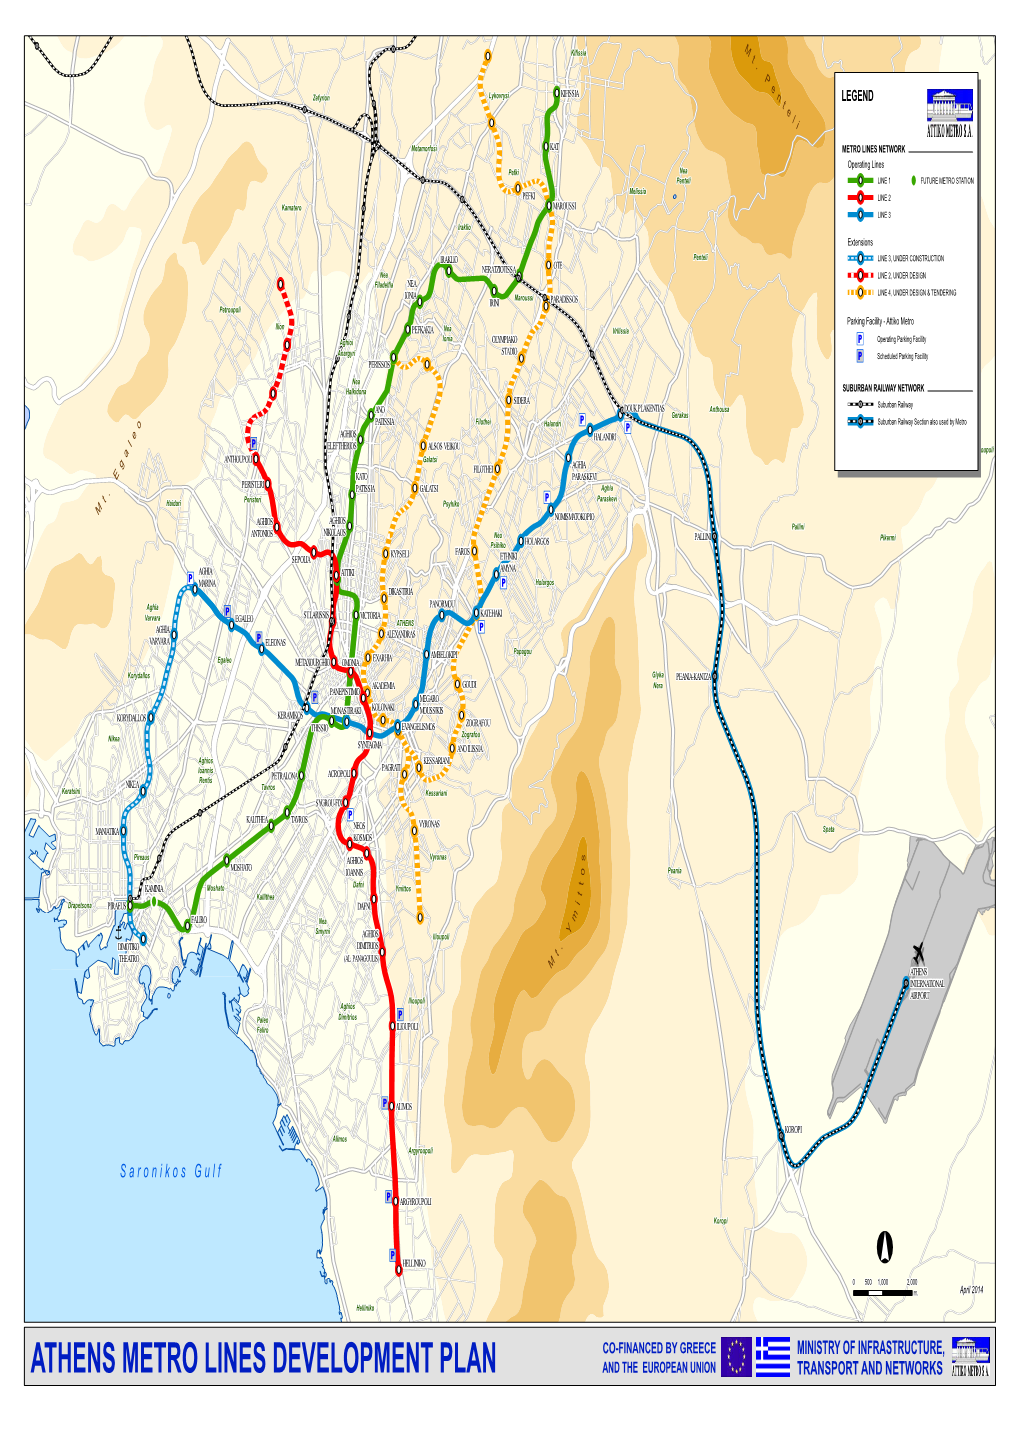 The Map of Athens Metro Network